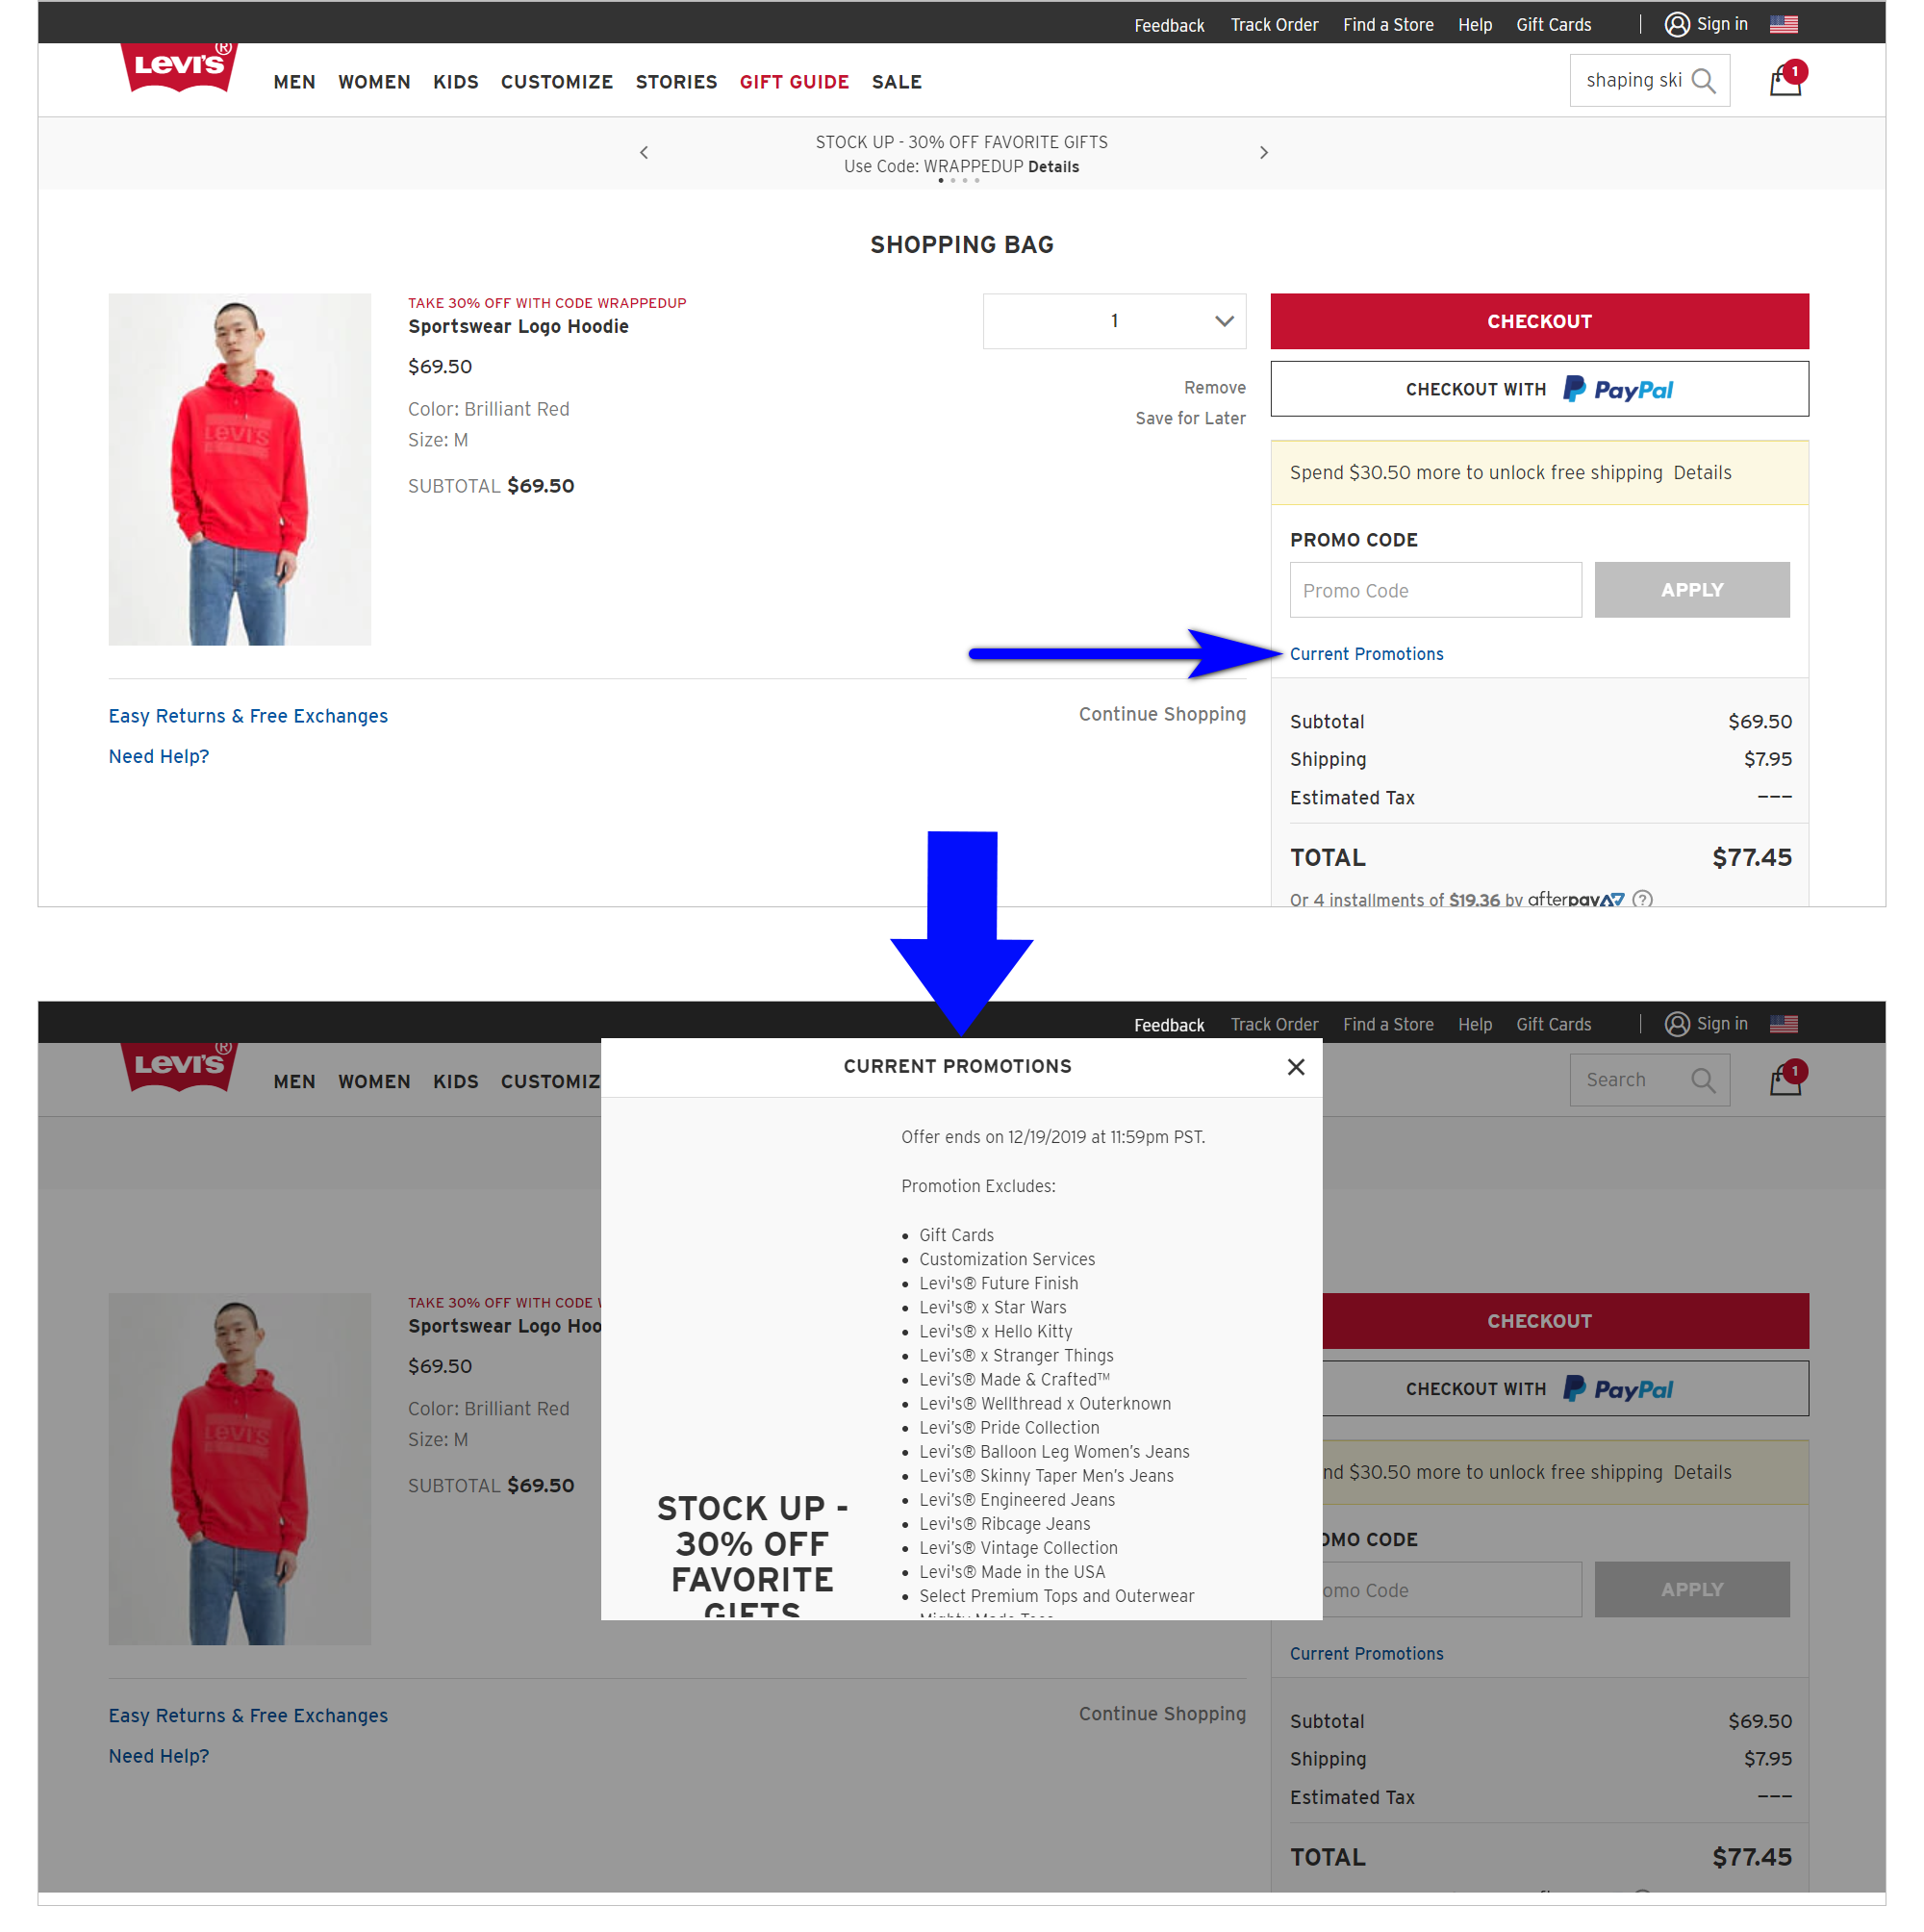 discount pricing strategies - ways to avoid losing customers during checkout example - first image shows levi.com shopping cart page with a visually prominent promo code box and a "current promotions" link below it. second image shows the popover that appears when the link is clicked. the popover lists current promos